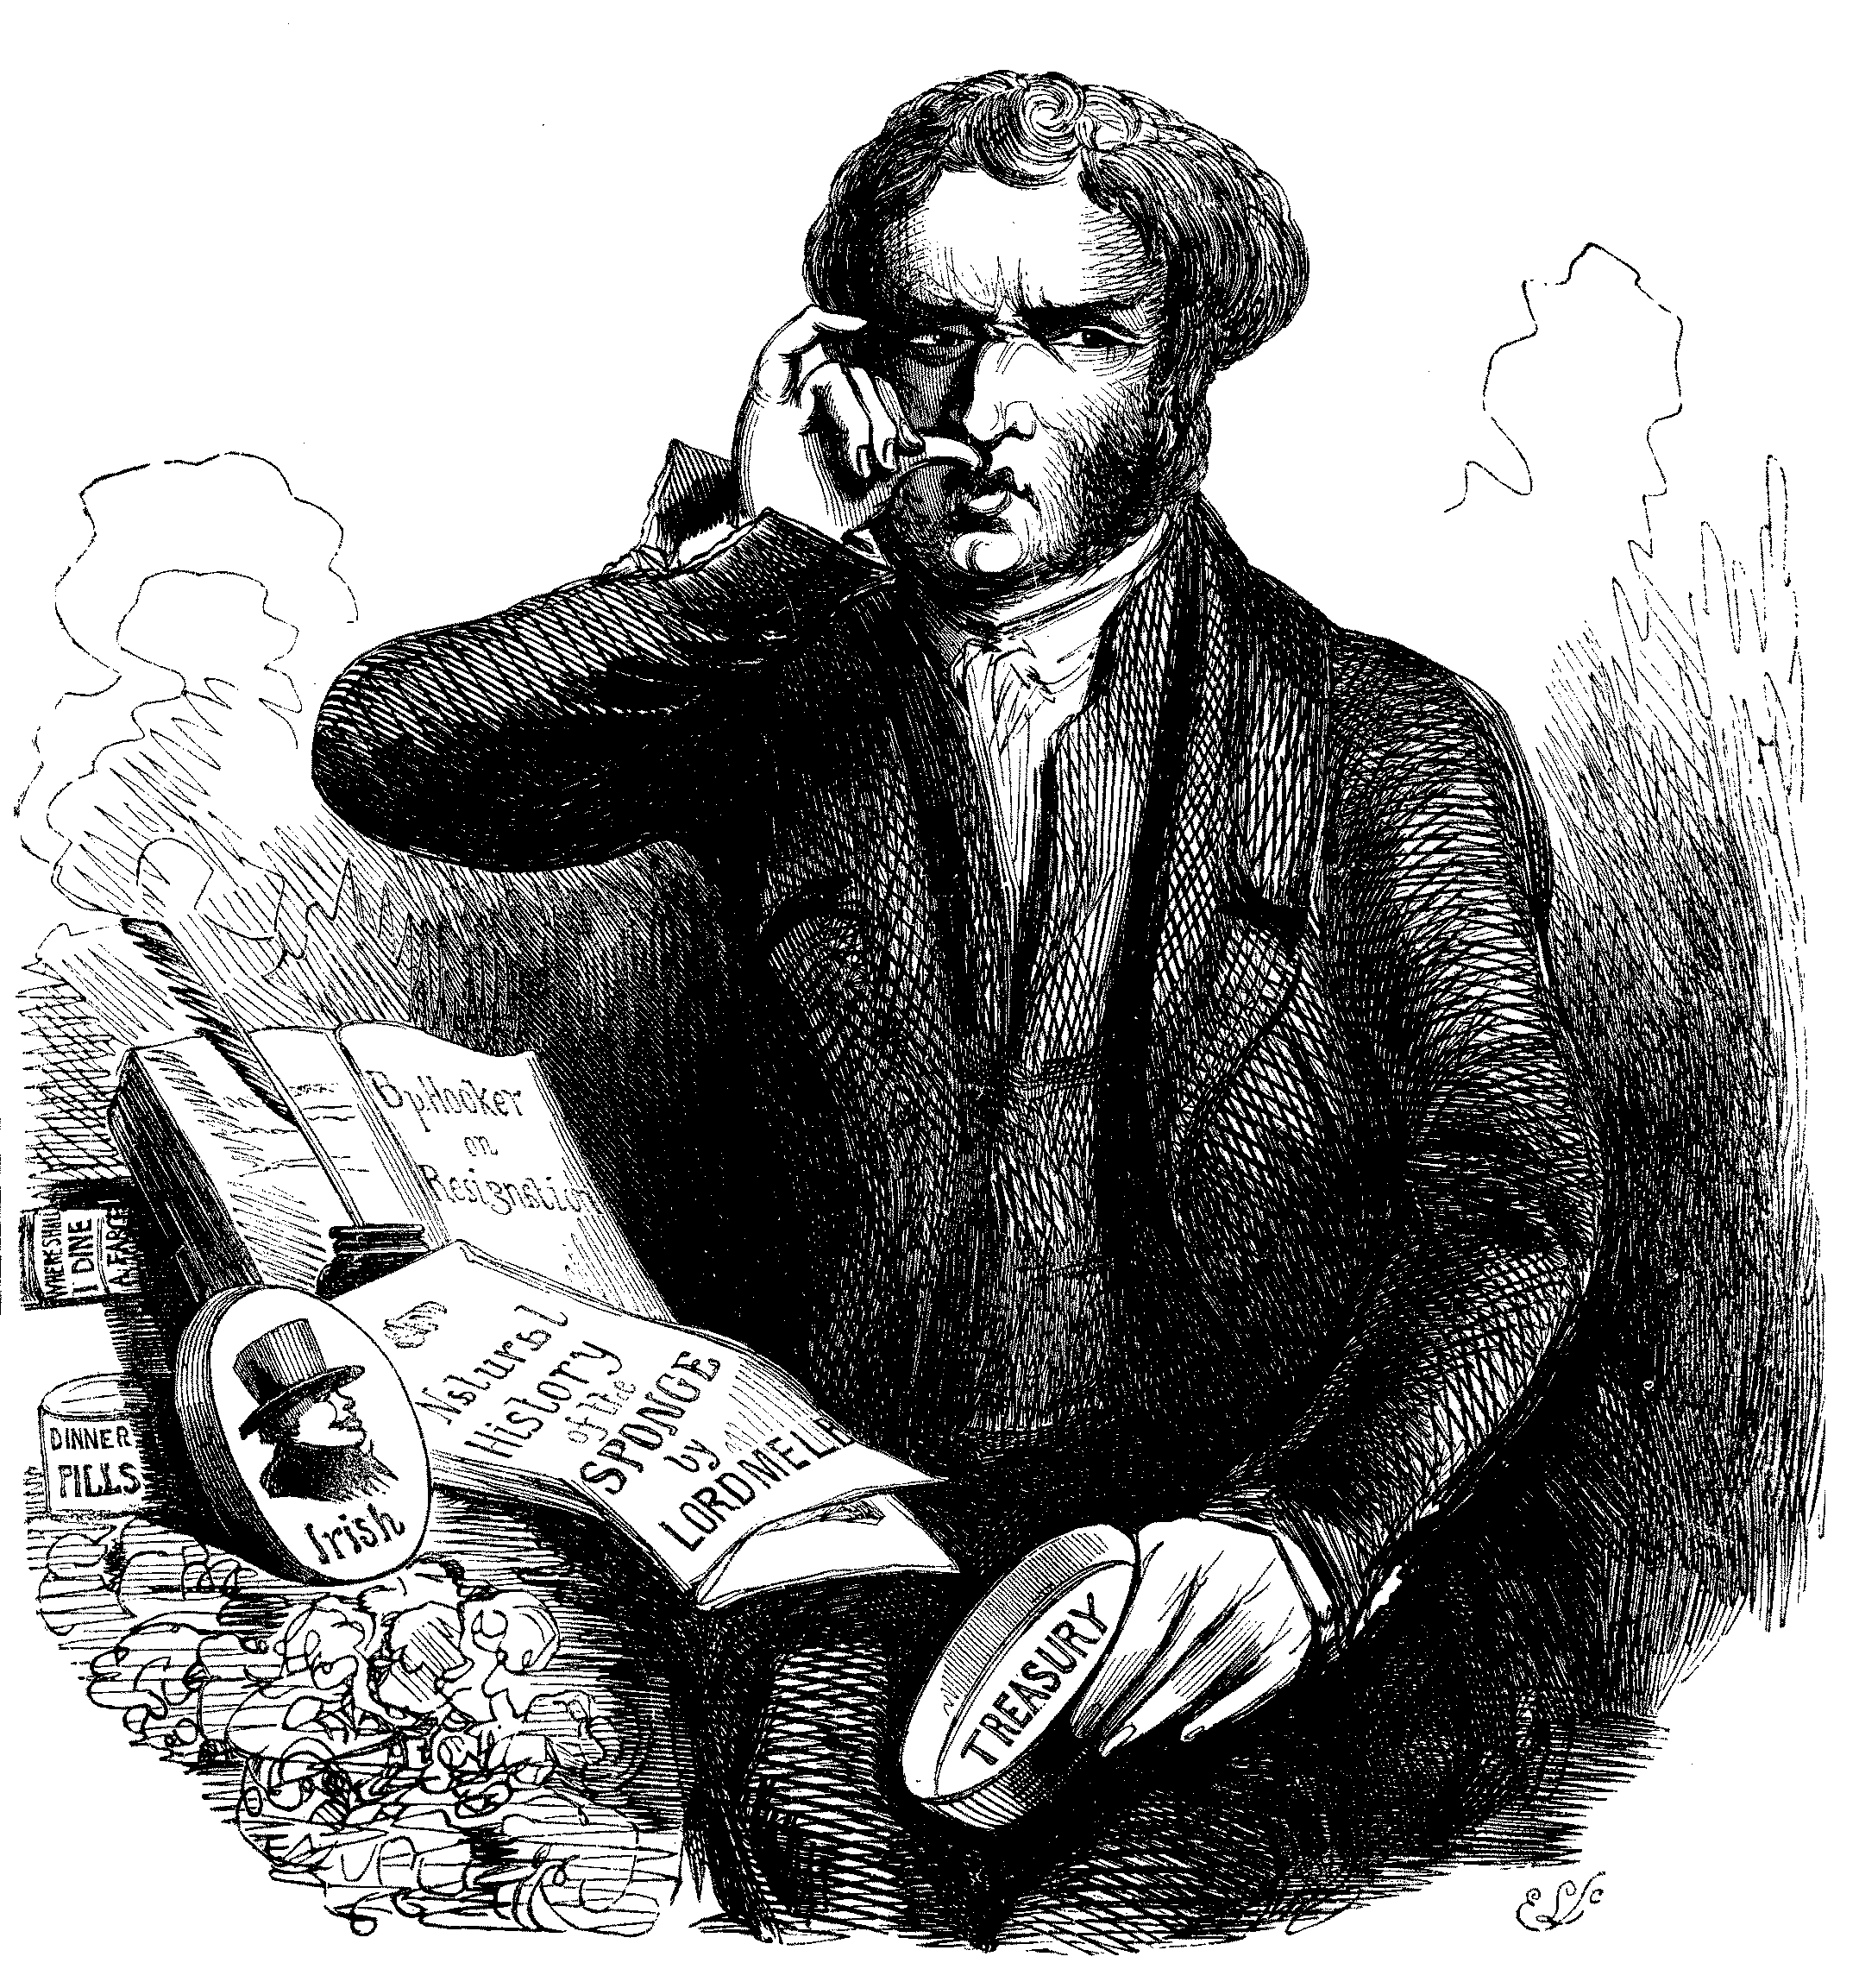 A gentleman taking snuff from a box marked 'Treasury', surrounded by pamphlets and books, one of which says 'Natural History of the Sponge by Lord Melb'